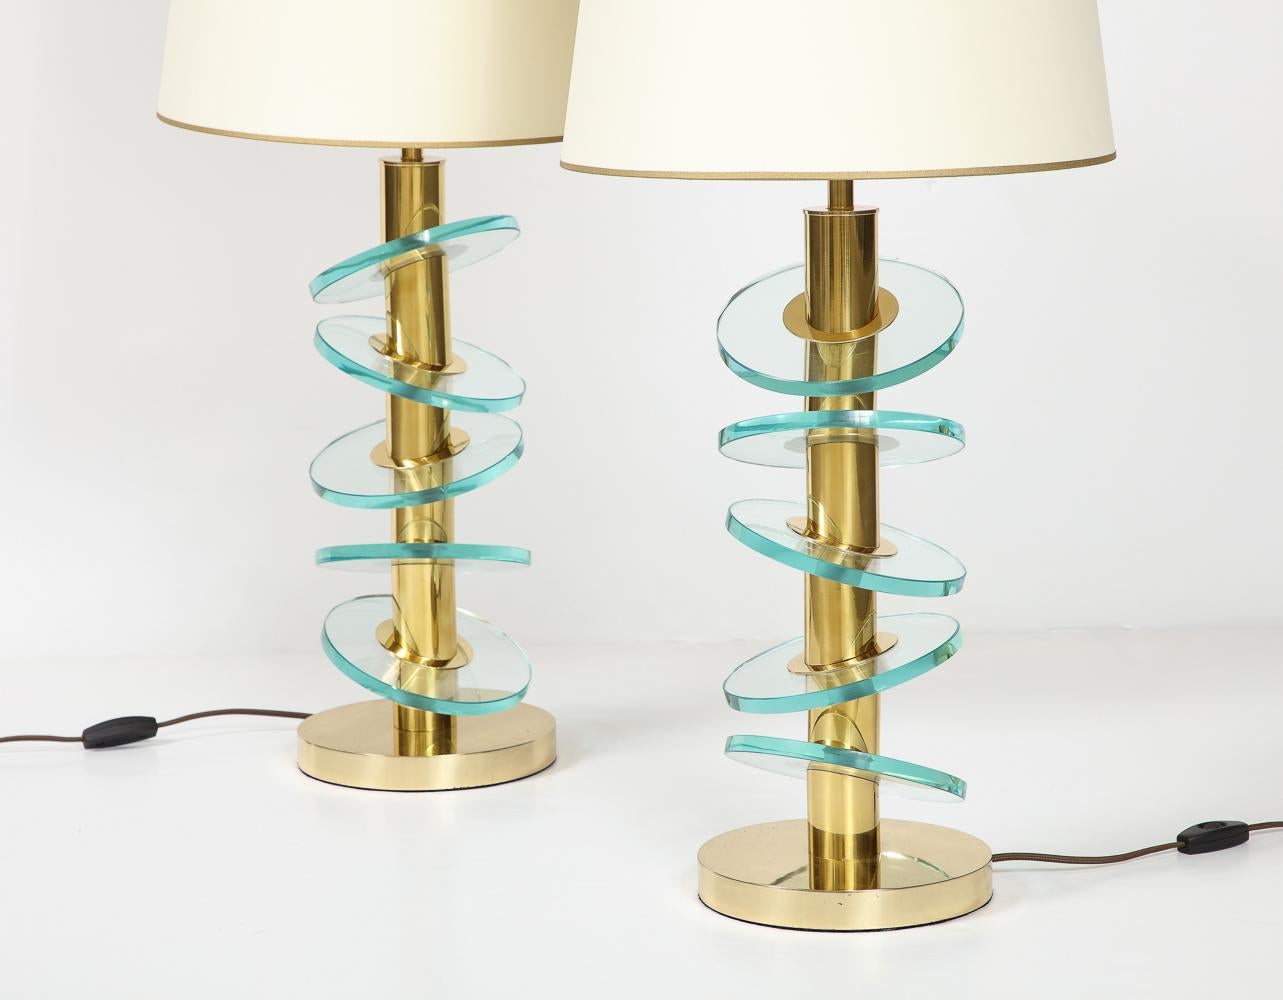 Studio-Made Table Lamps by Fedele Papagni In New Condition For Sale In New York, NY